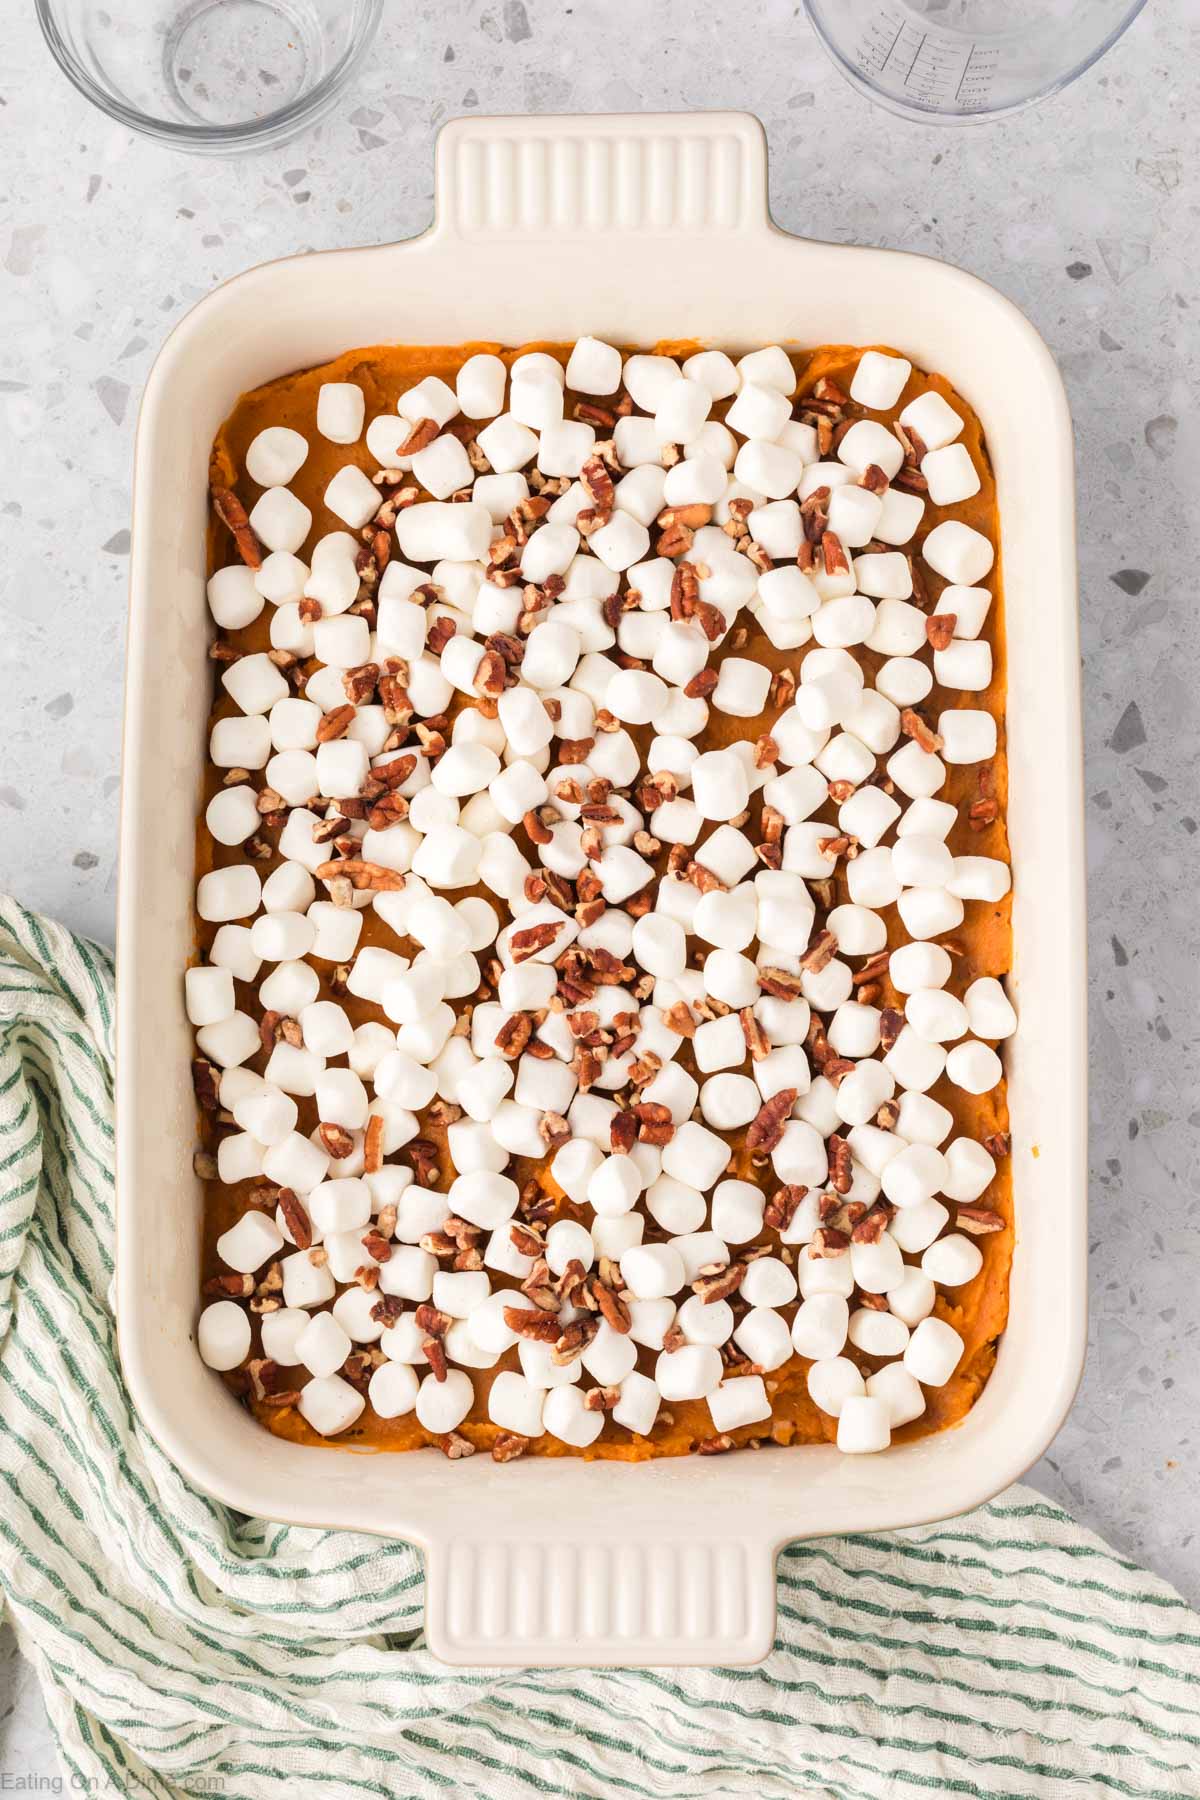 Topping the mashed sweet potatoes with pecans and marshmallows